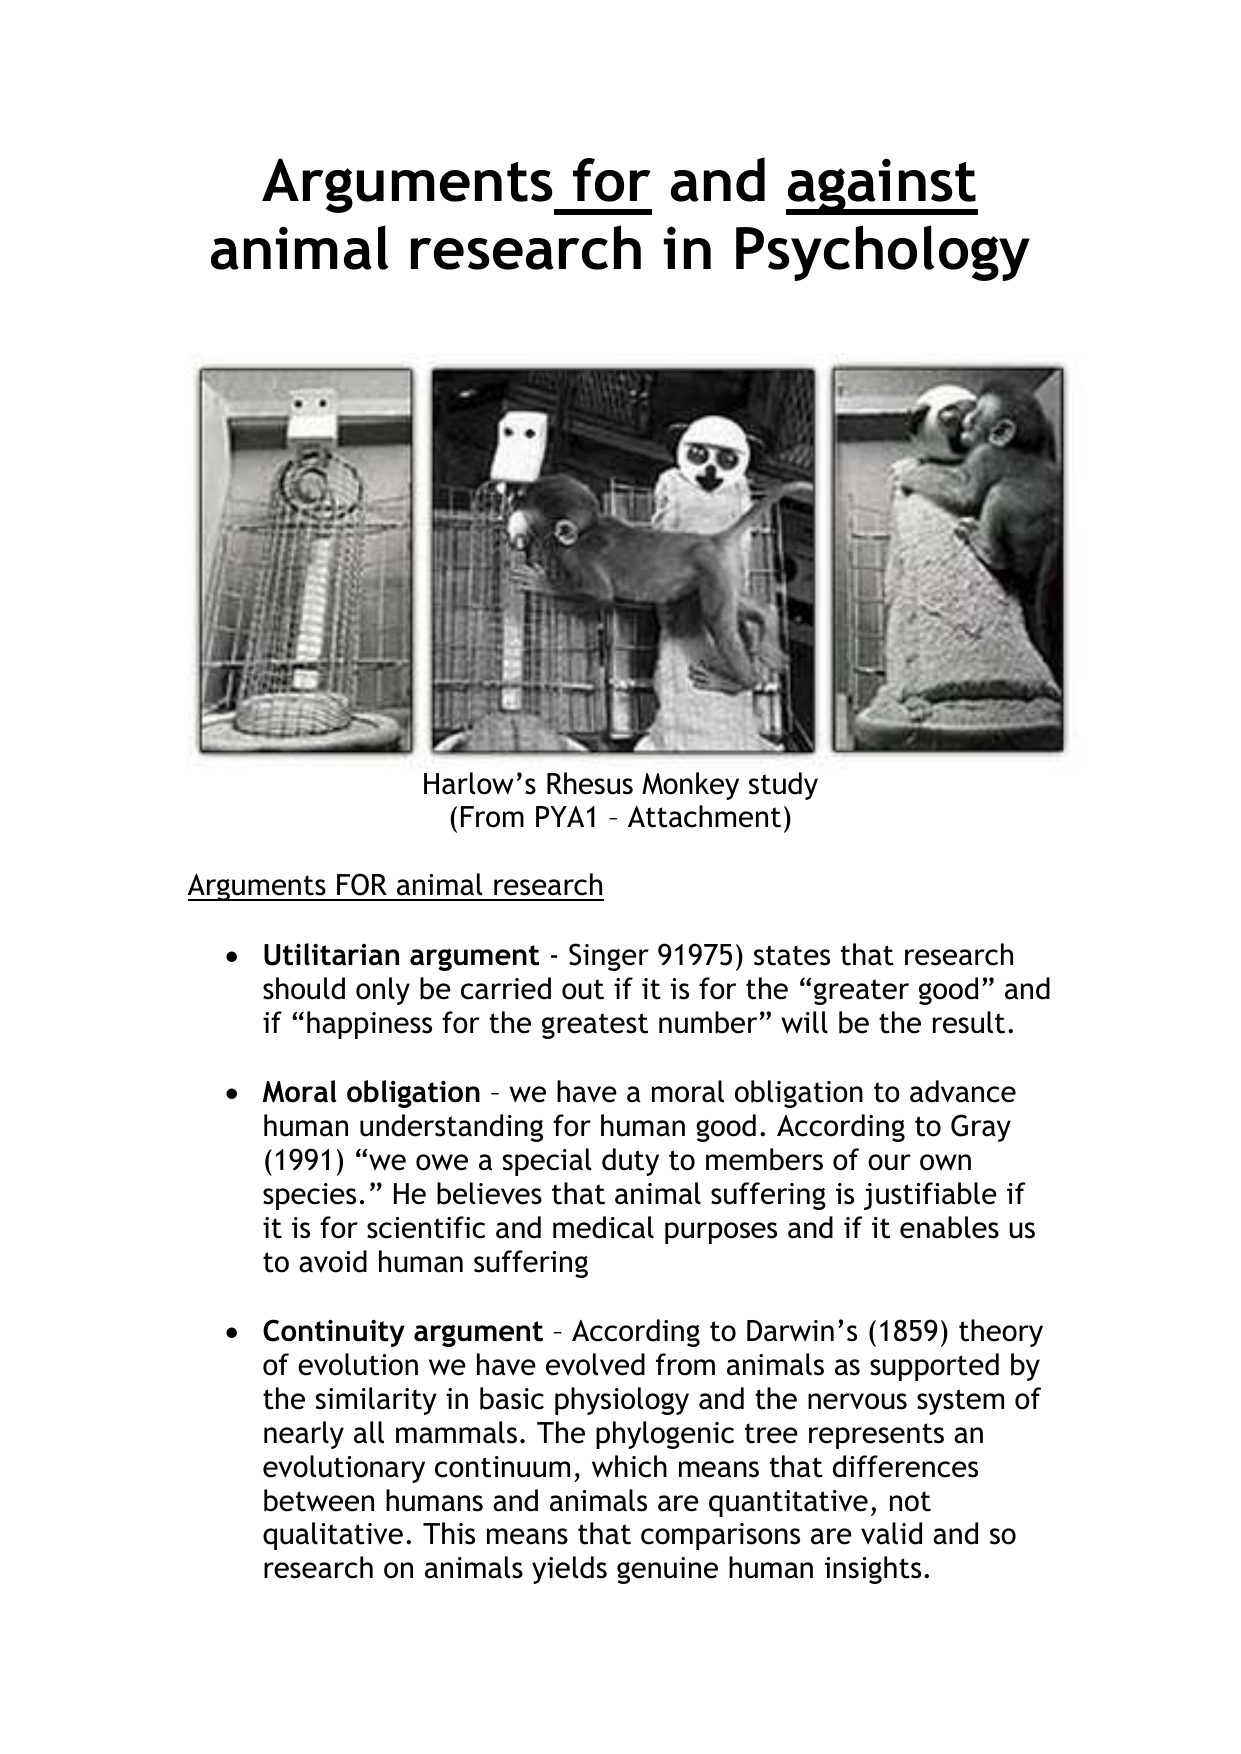 Arguments for and against animal research in Psychology